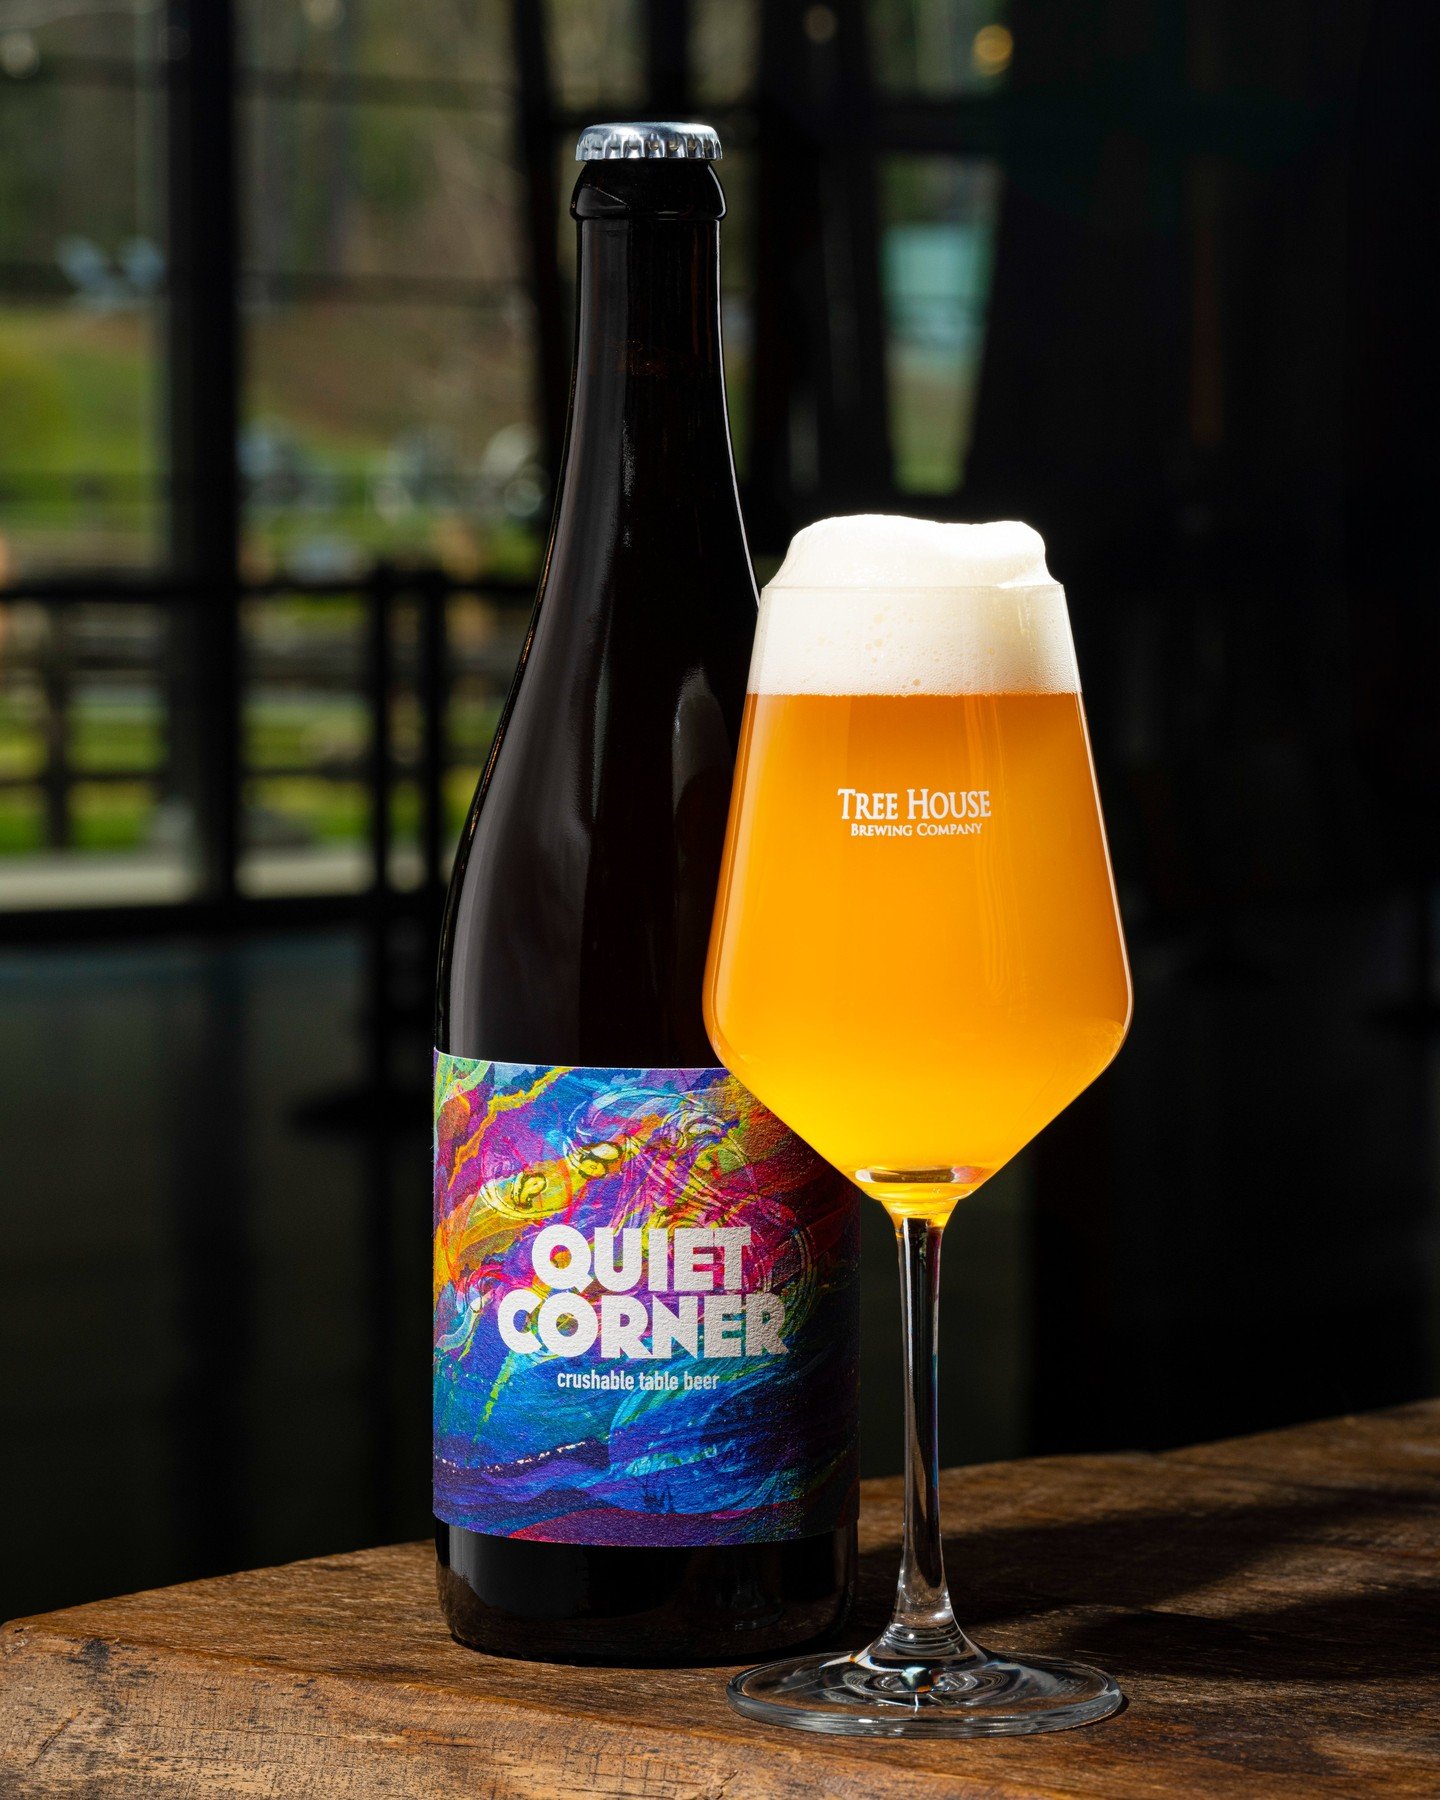 Today, we're releasing a simple little number called Quiet Corner in Woodstock. 

Carrying hints of wheat, doughy malt, and lemon-like acidity, Quiet Corner is an elegant expression of its constituents and perfectly complements a contemplative aftern